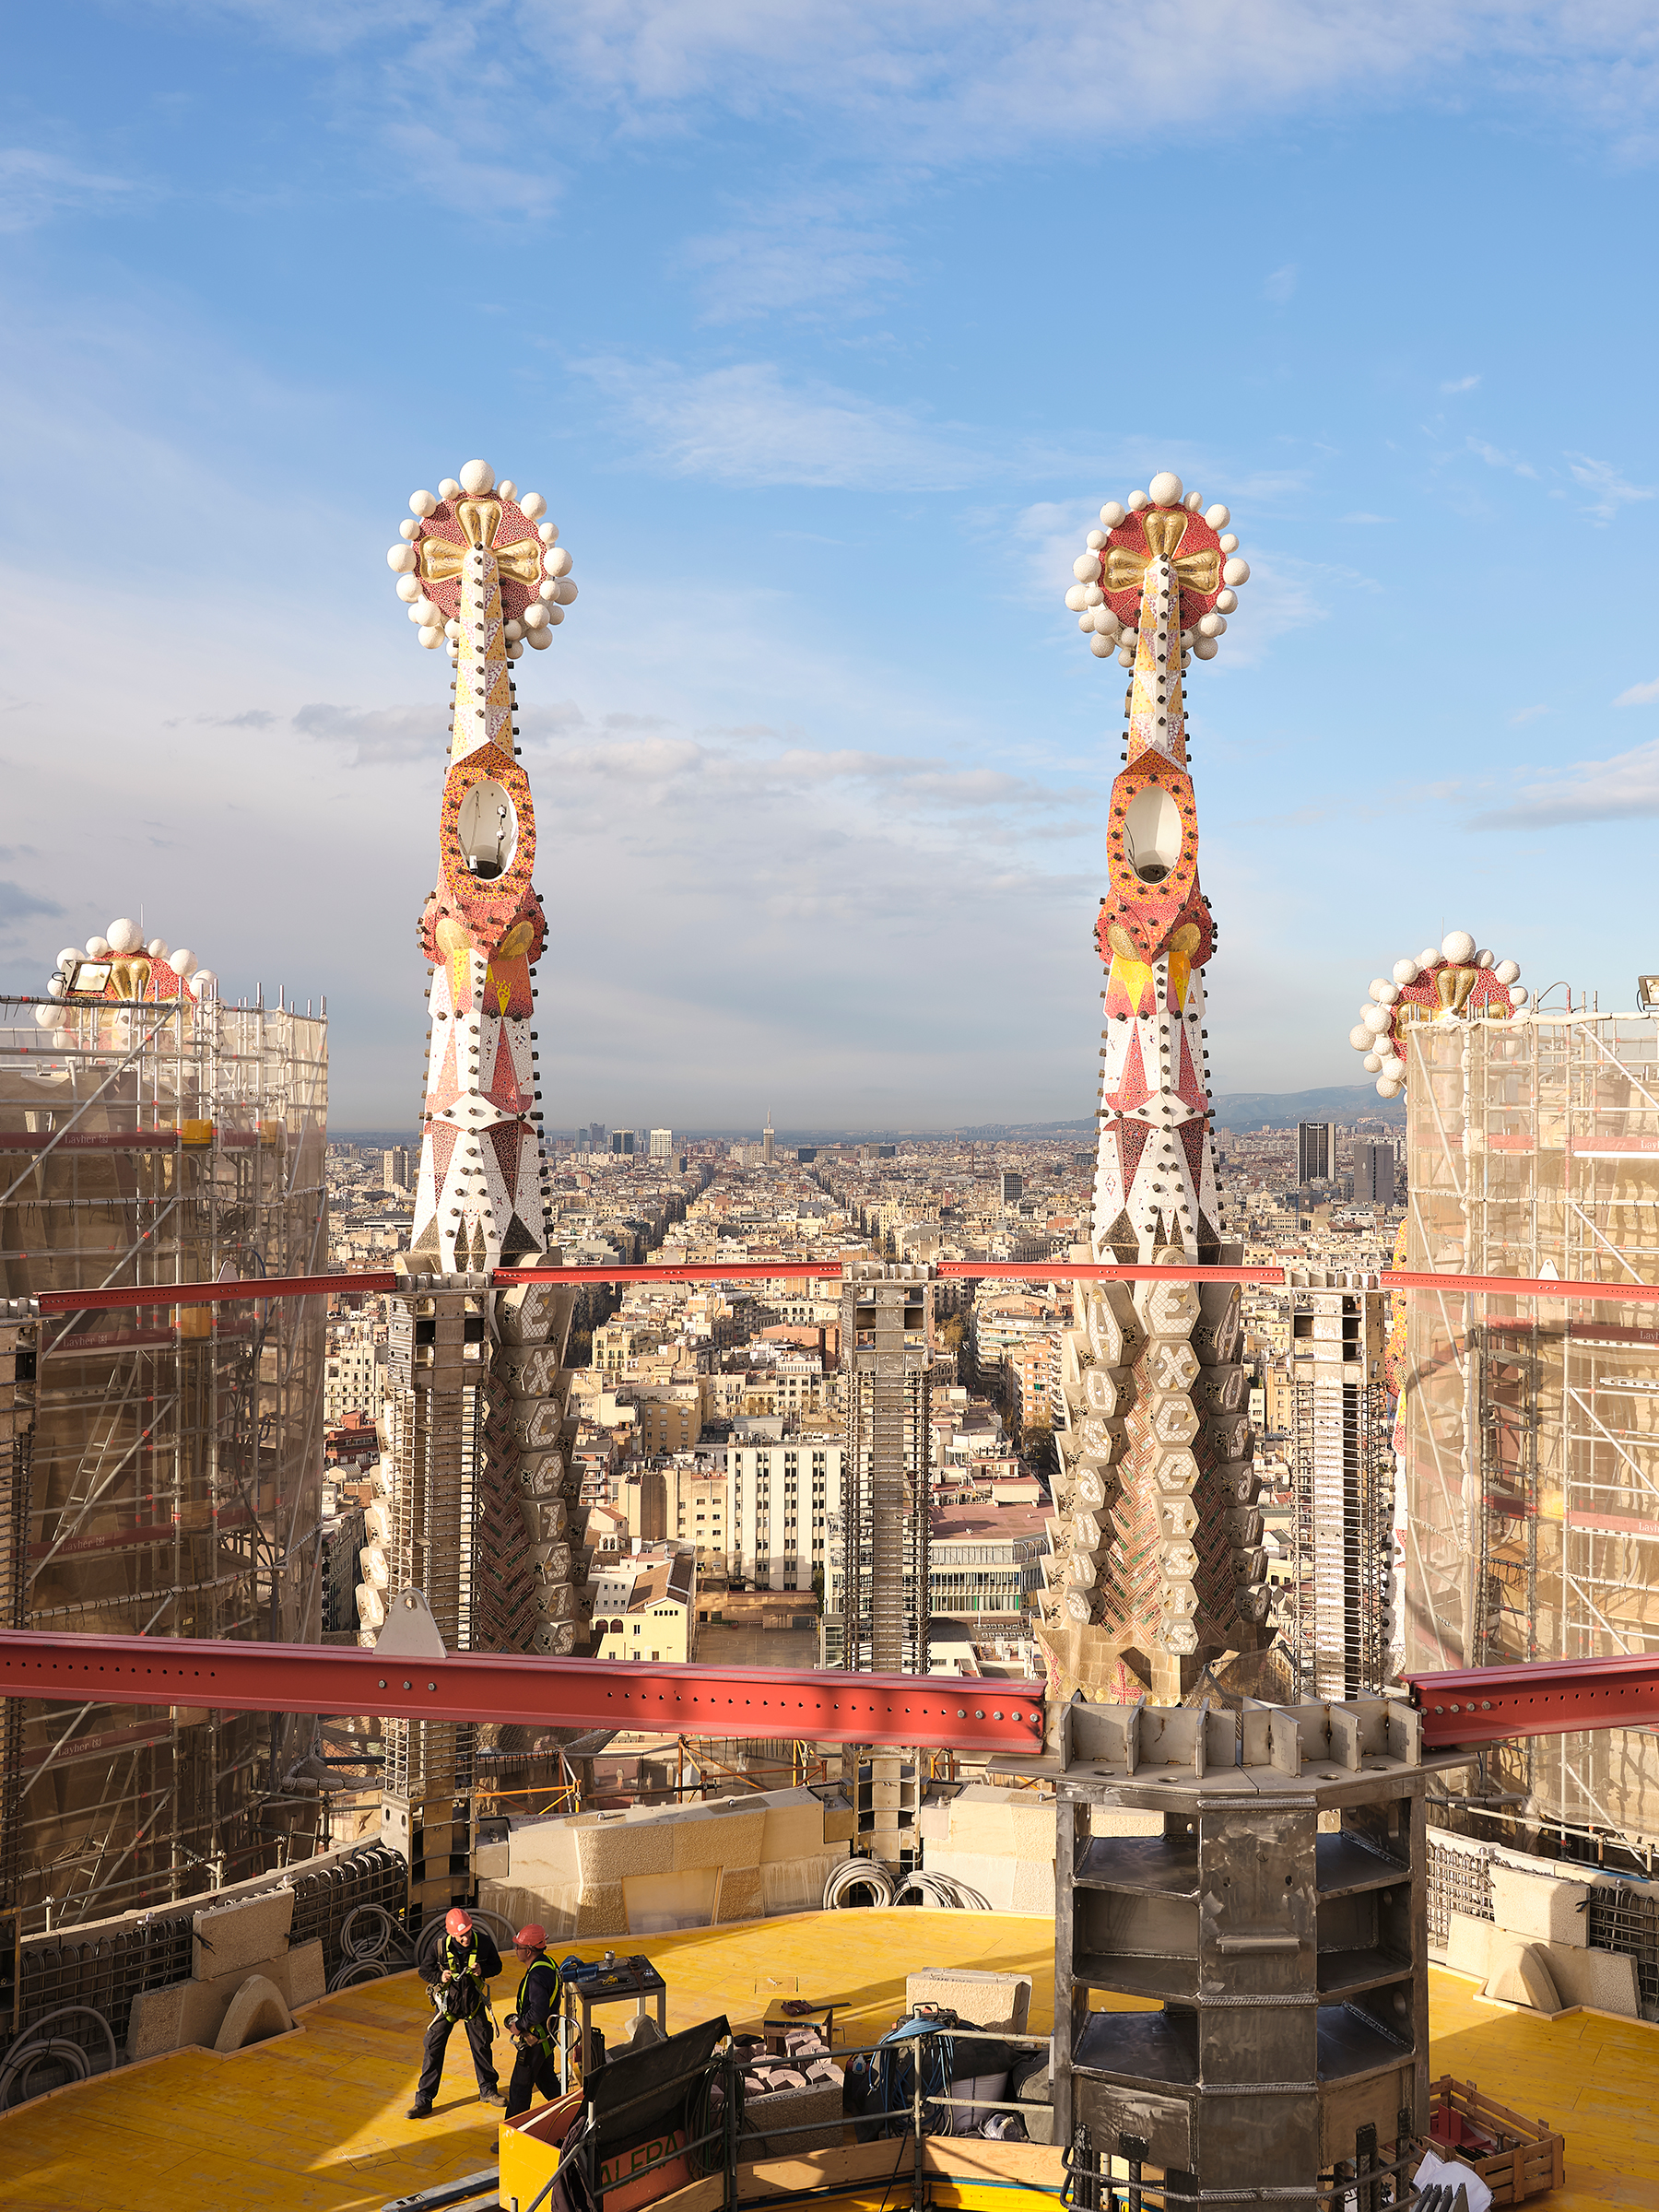 Workers atop the Sagrada Familia, one of the world's longest-running construction projects, in Barcelona in March. July 8 issue. (Luca Locatelli for TIME)